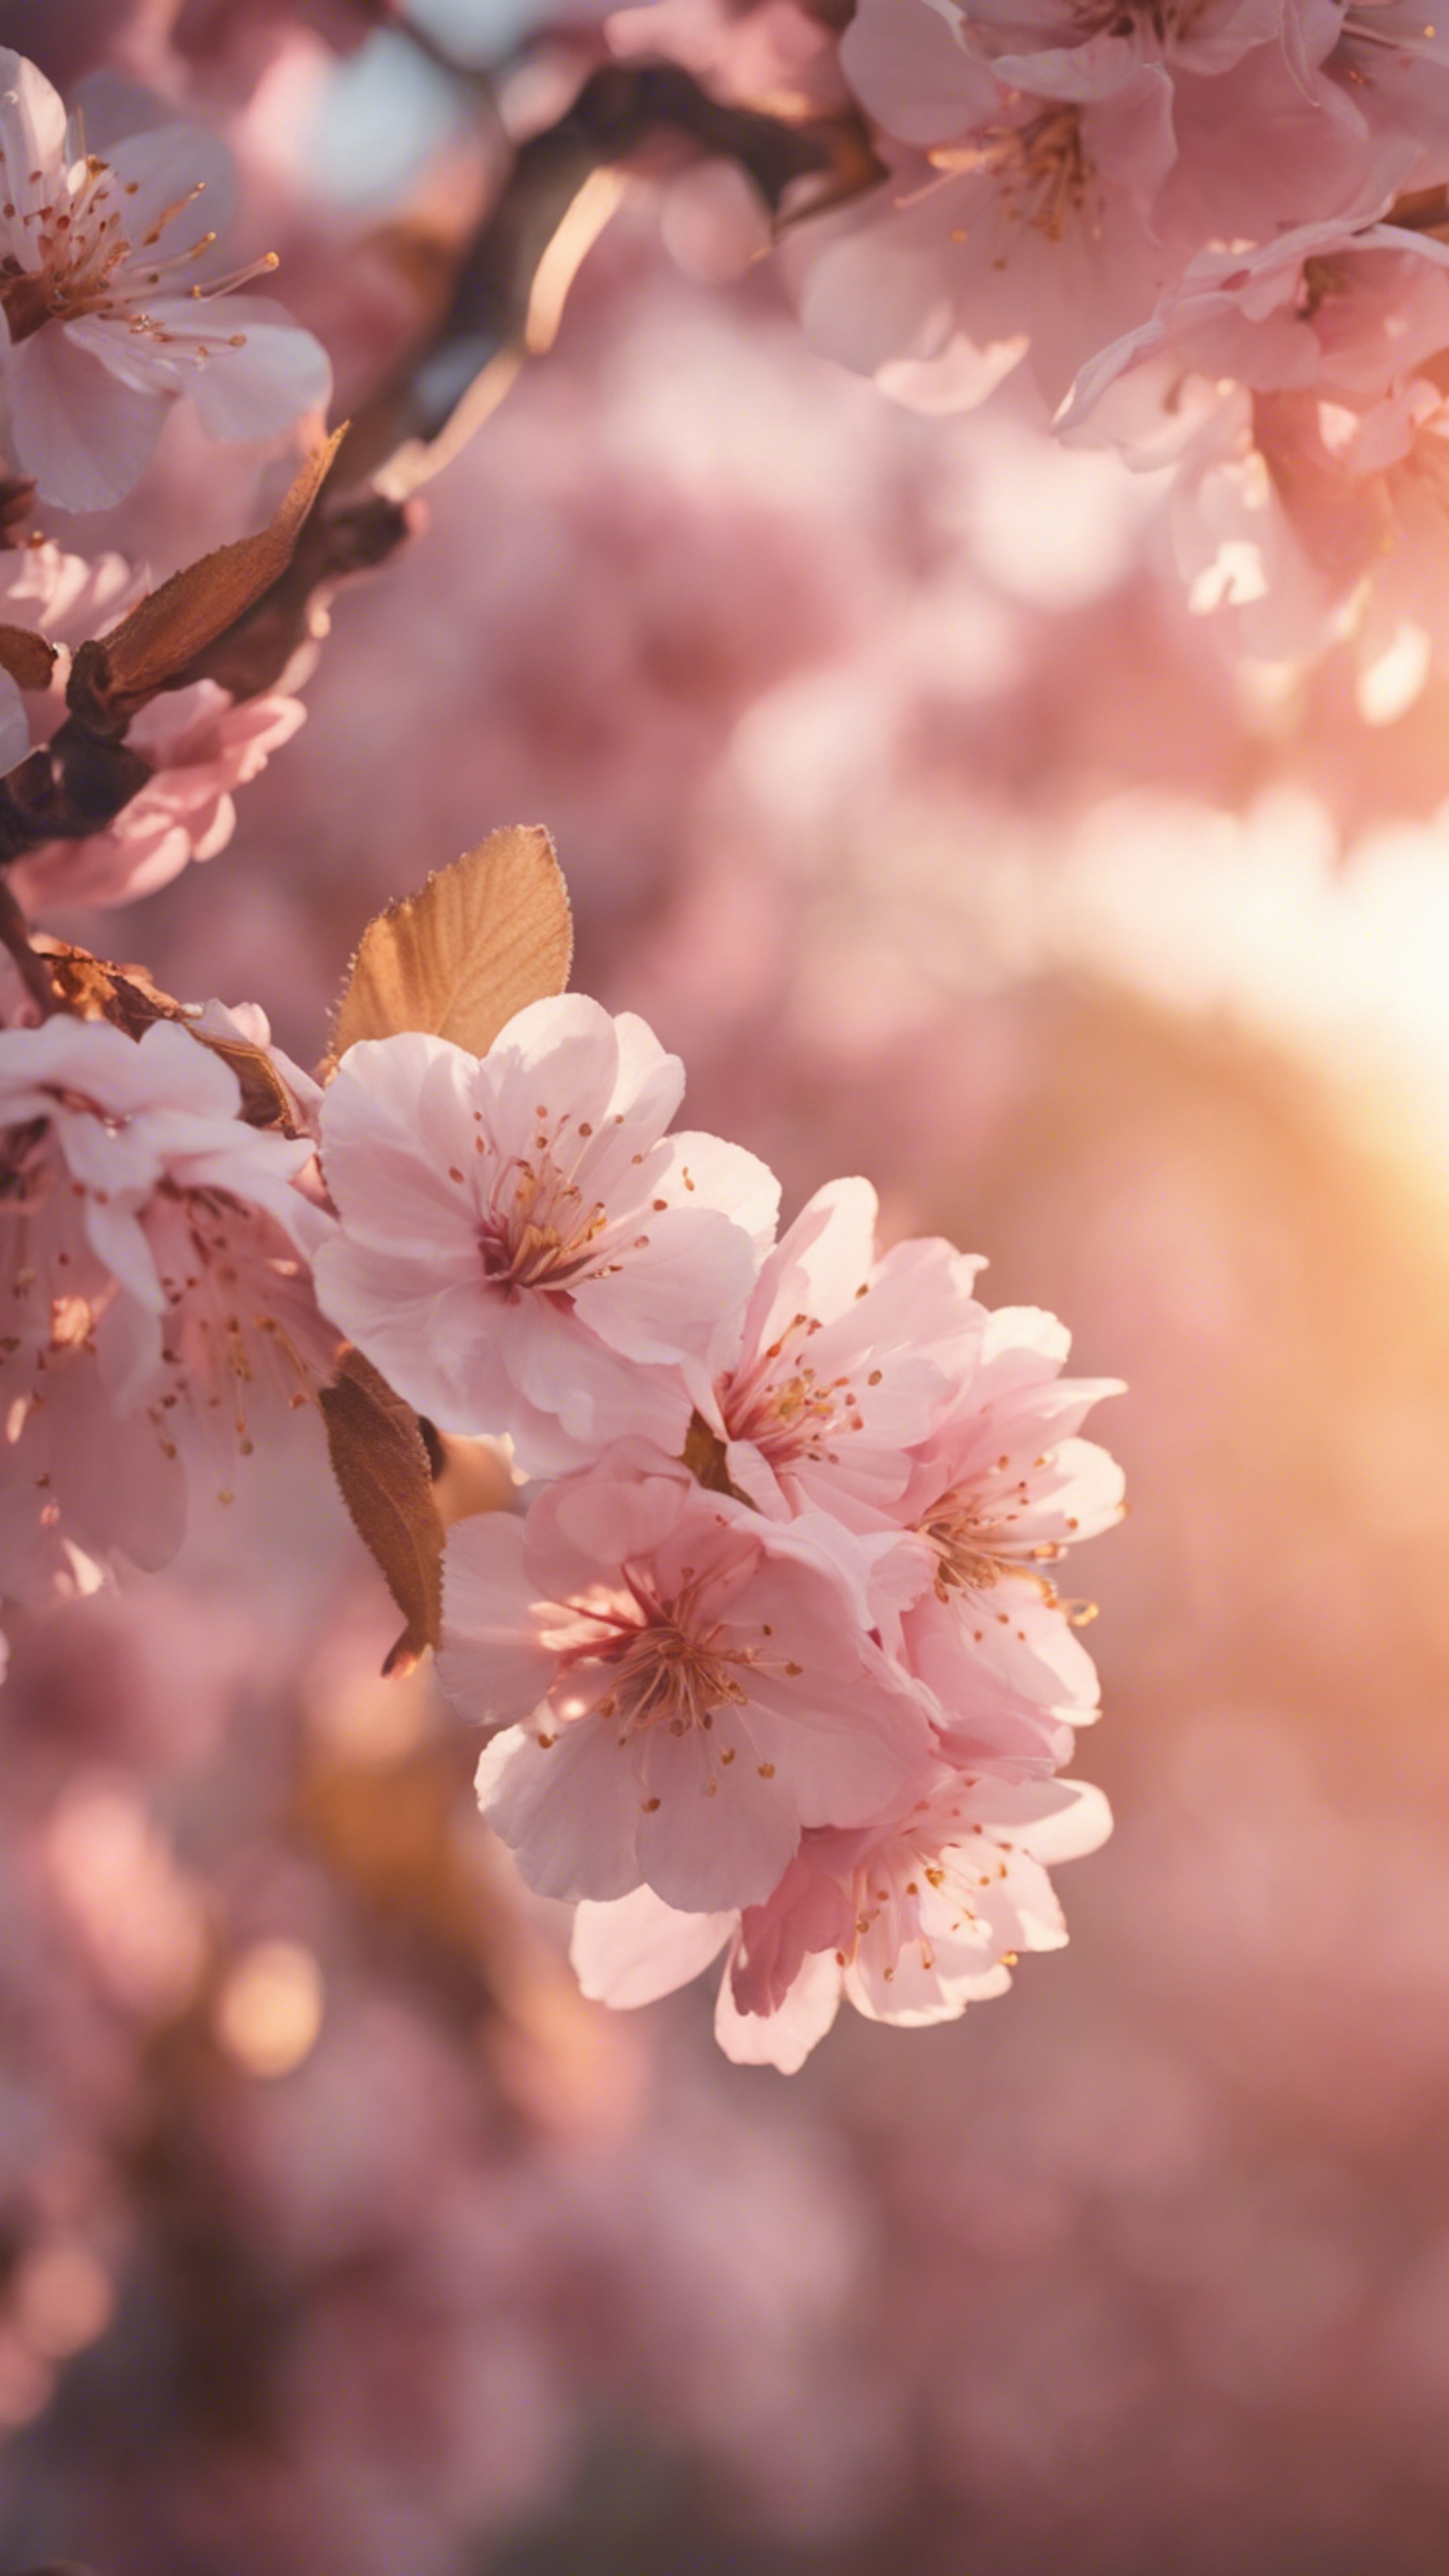 A delicate pink cherry blossom tree with gold leaves against a soft sunset.壁紙[63878b5c392143fbba4e]